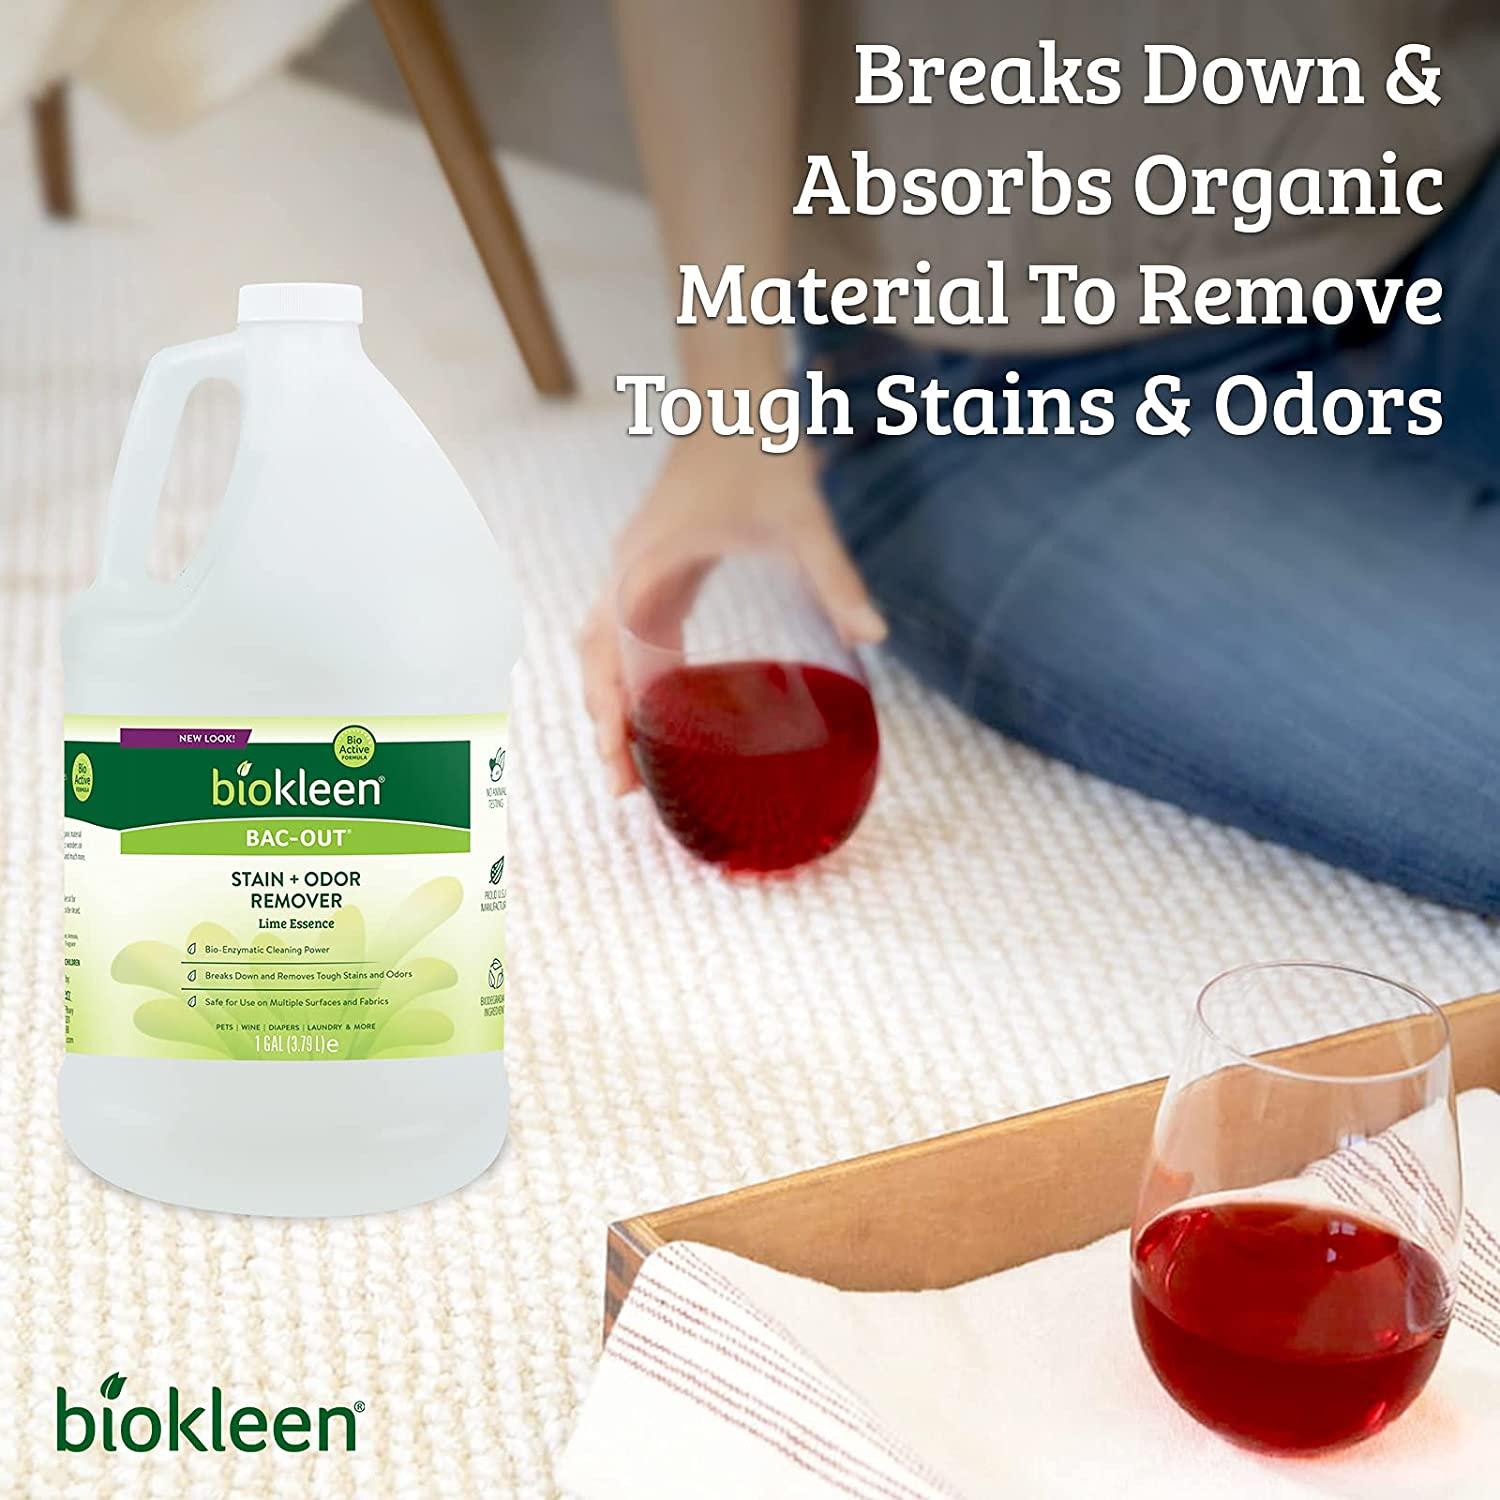 Biokleen Bac-Out Stain Remover for Clothes & Carpet - 128 Ounce